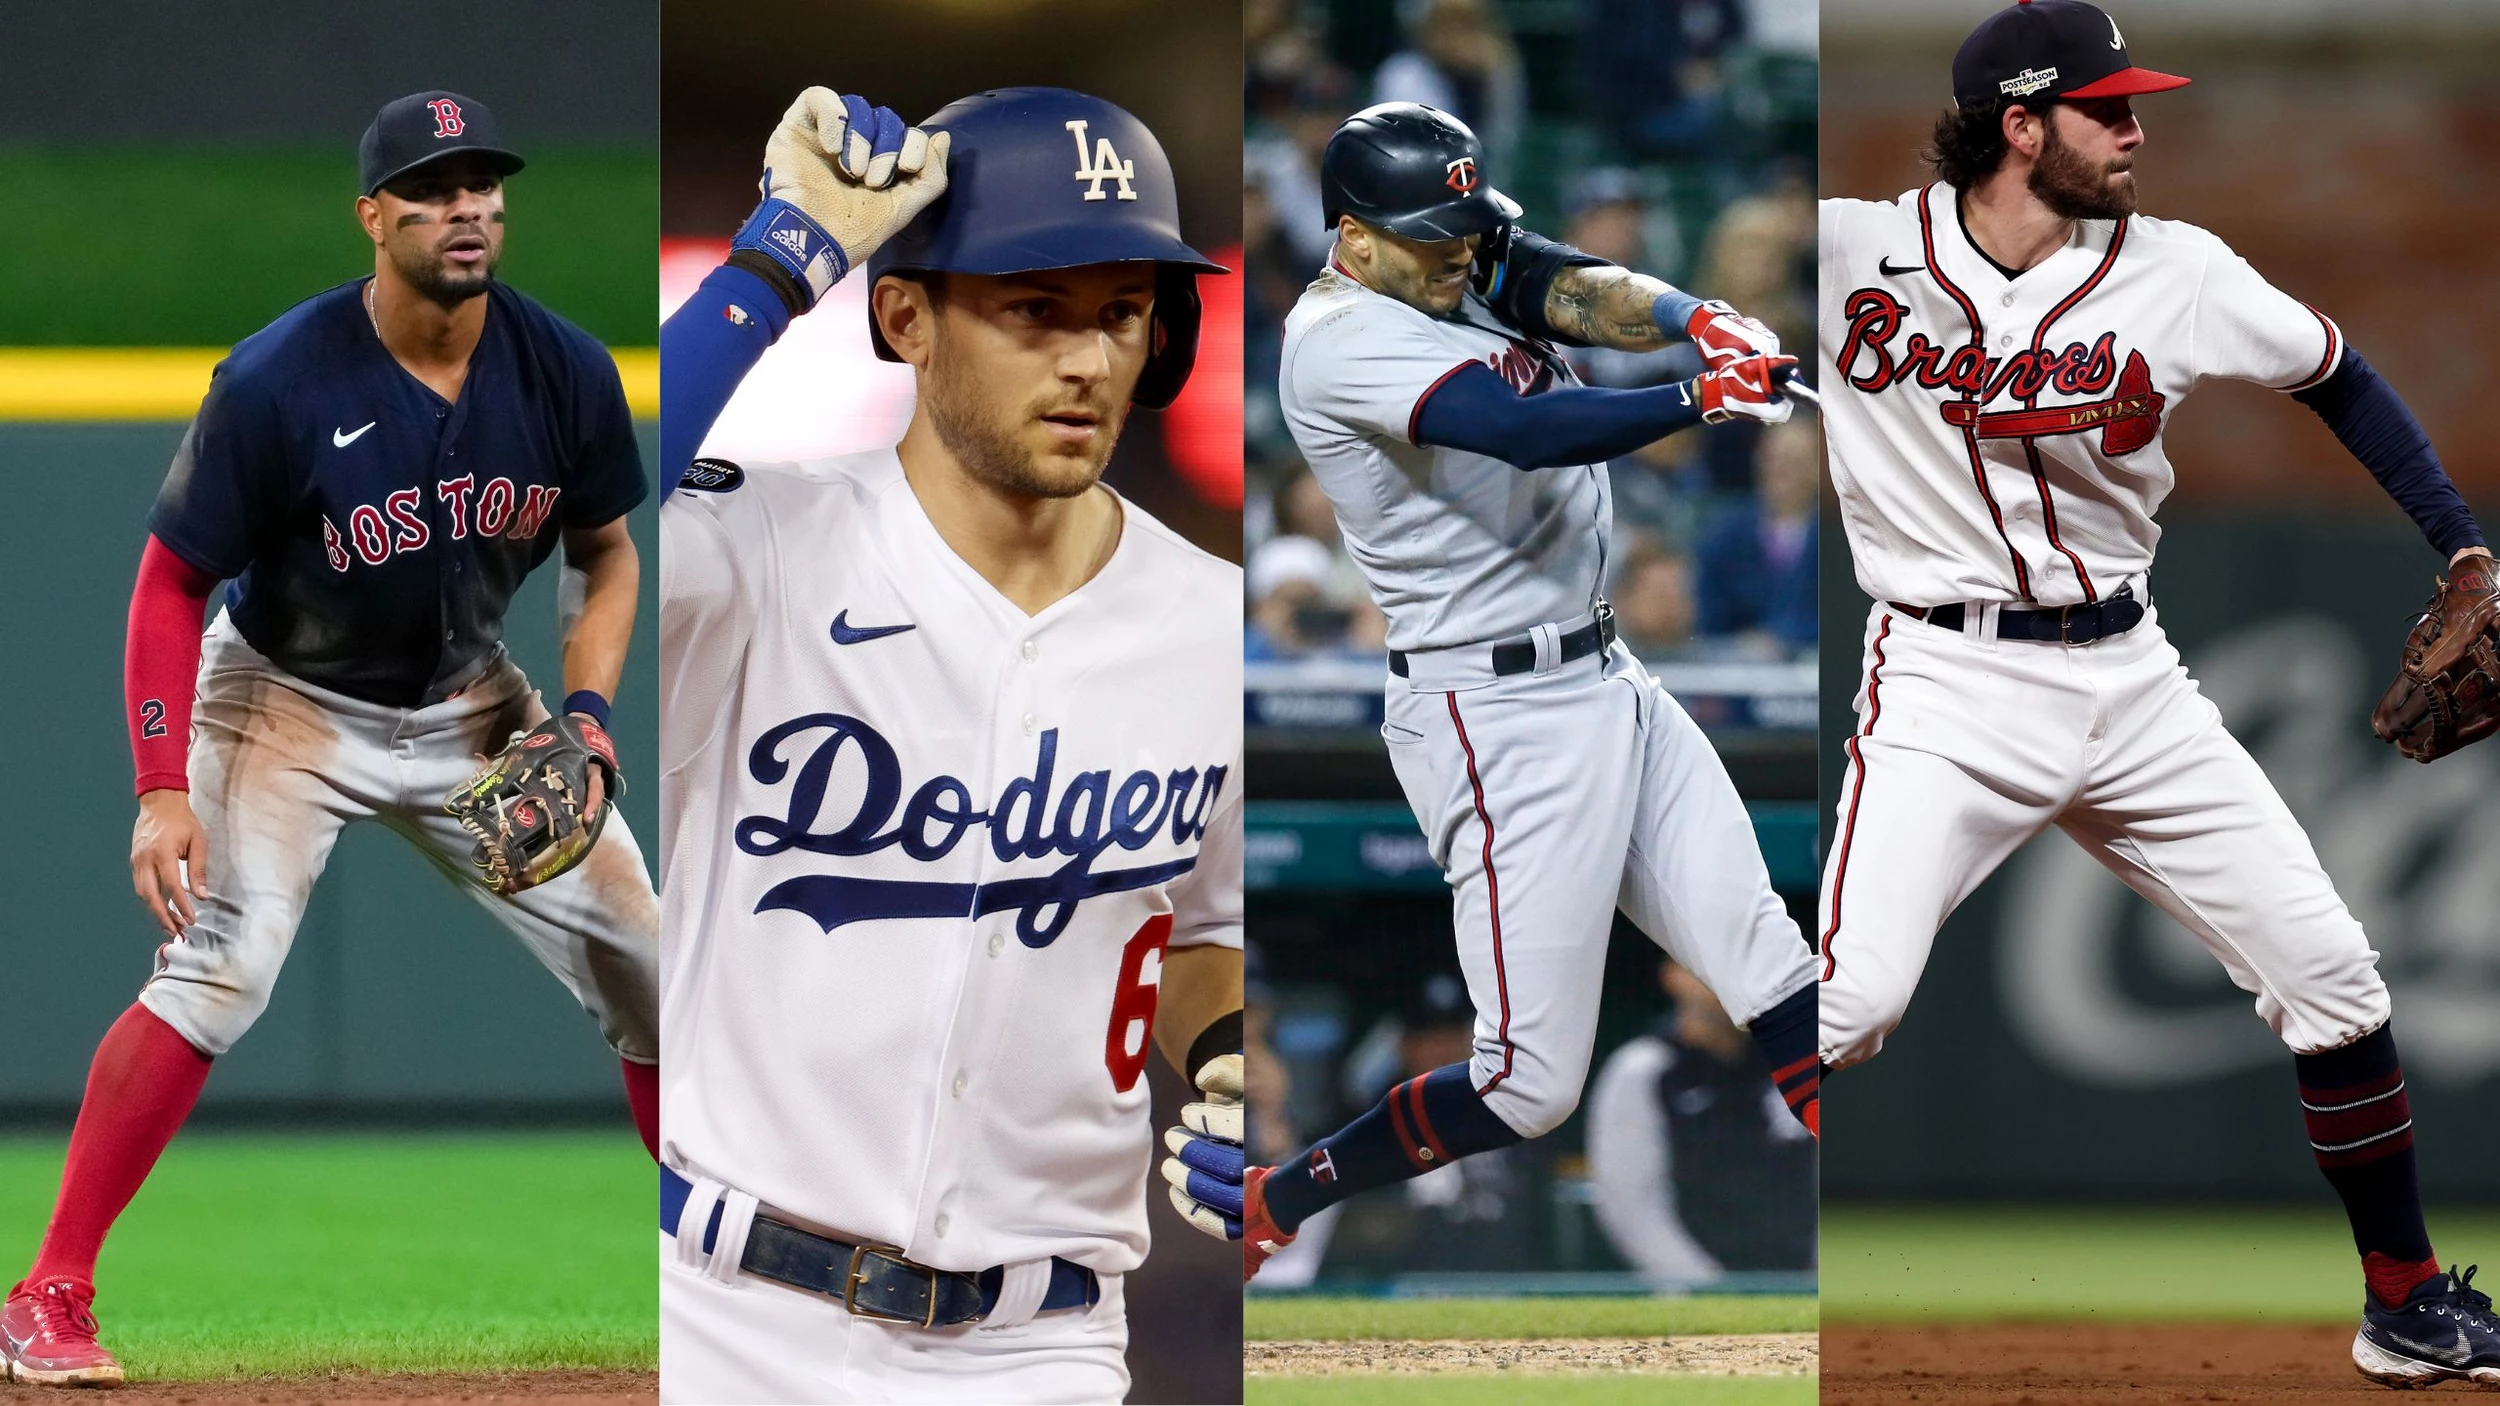 Dansby Swanson Free Agency: Top 5 destinations for Gold Glove All-Star  Shortstop